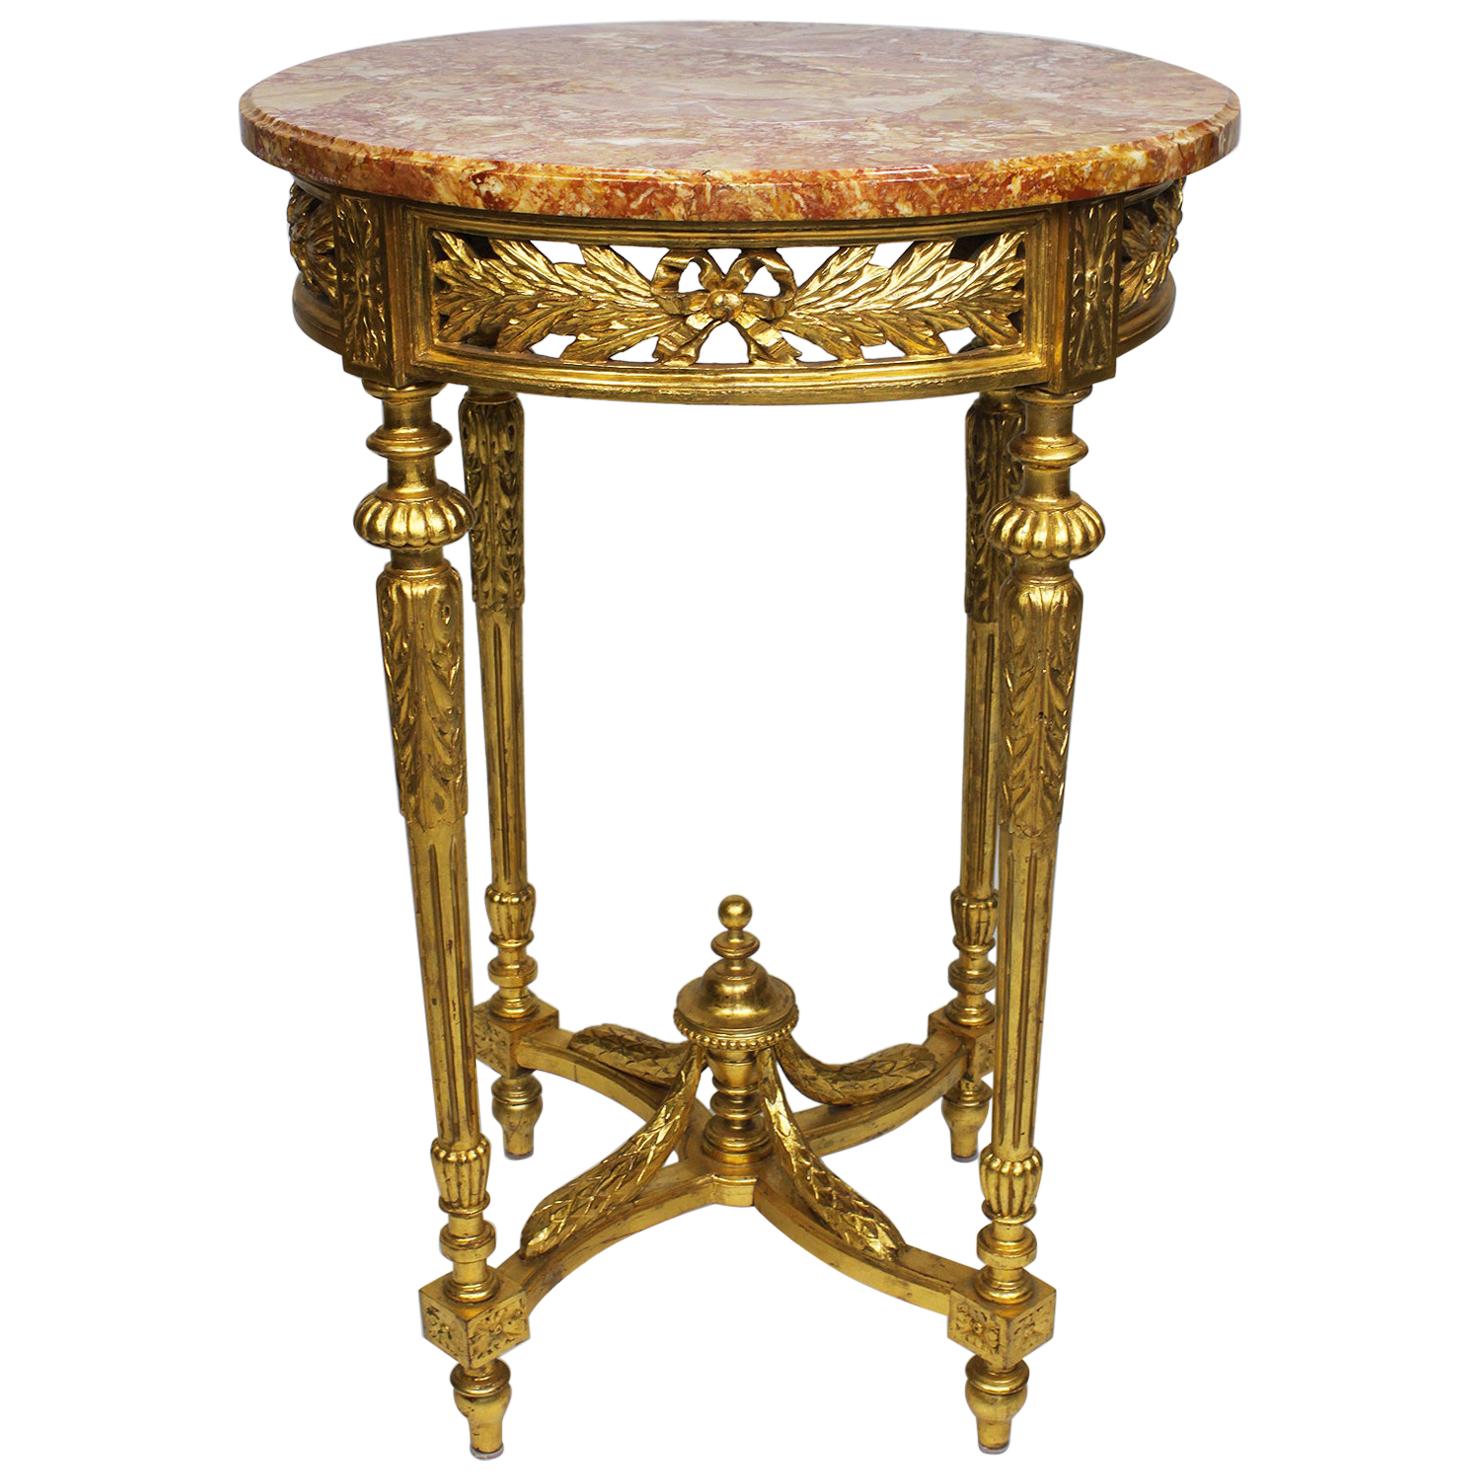 Fine French Louis XVI Style Gilt Wood Carved Guéridon Side Table with Marble Top